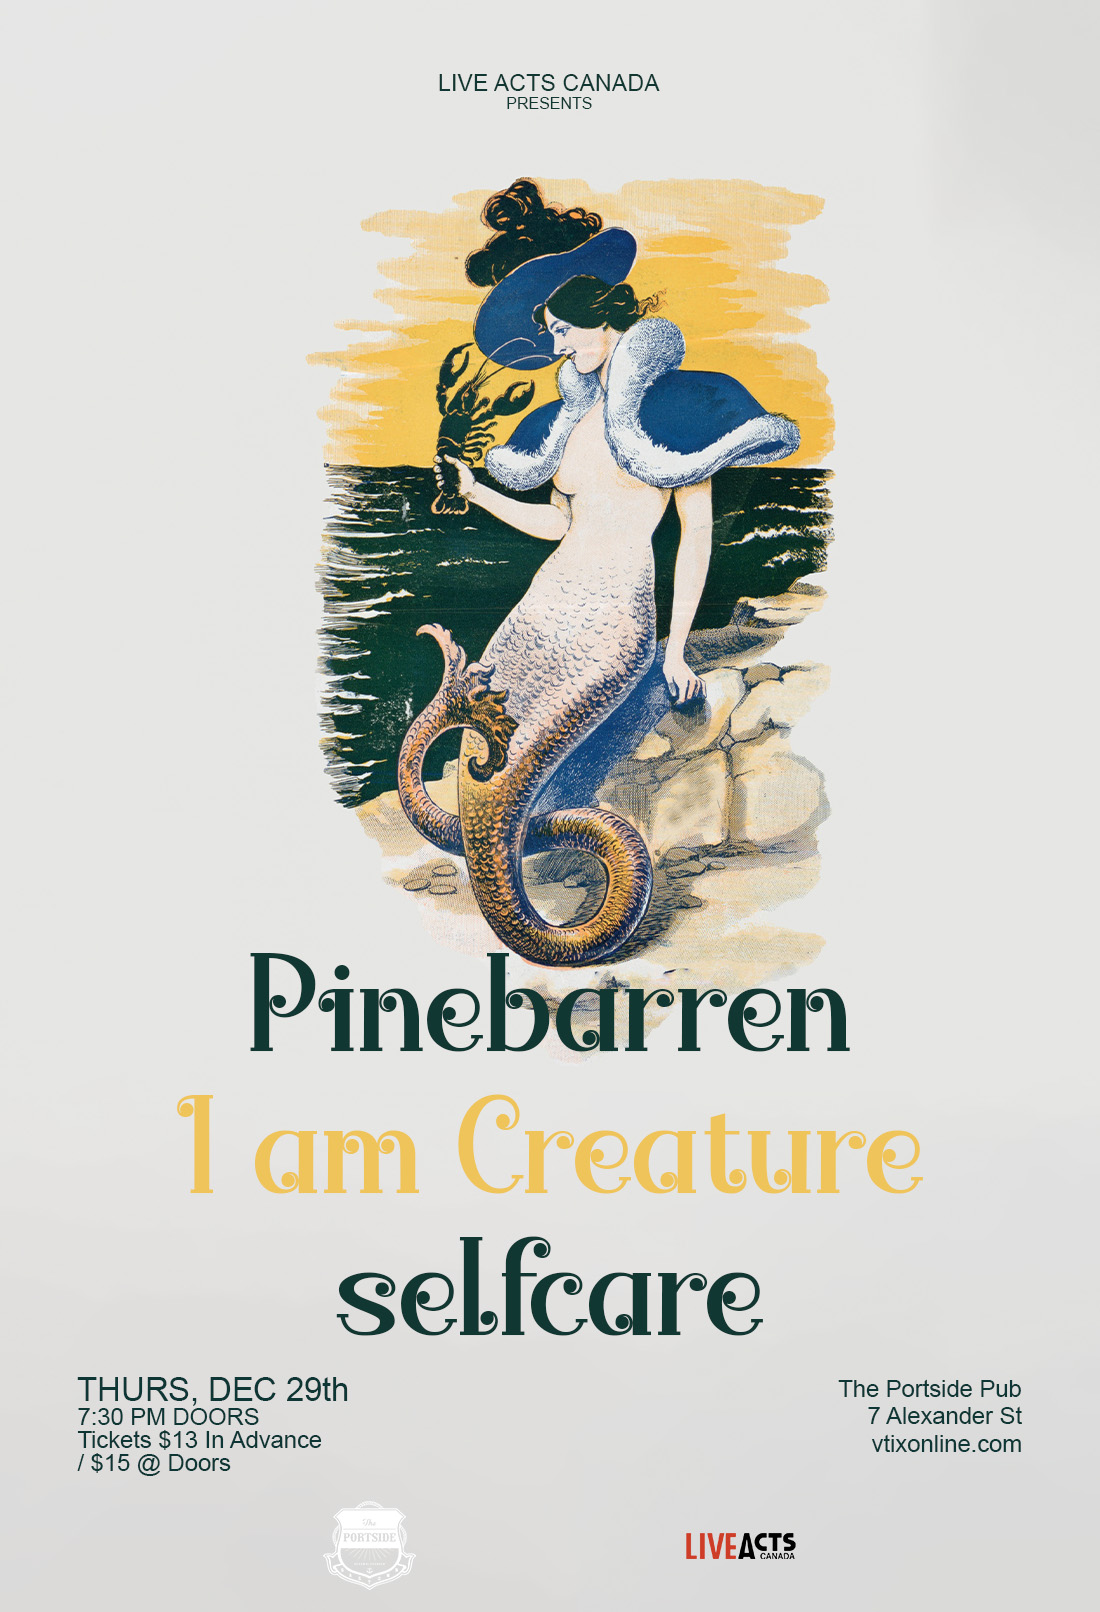 Pinebarren with Special Guests I am Creature and Selfcare